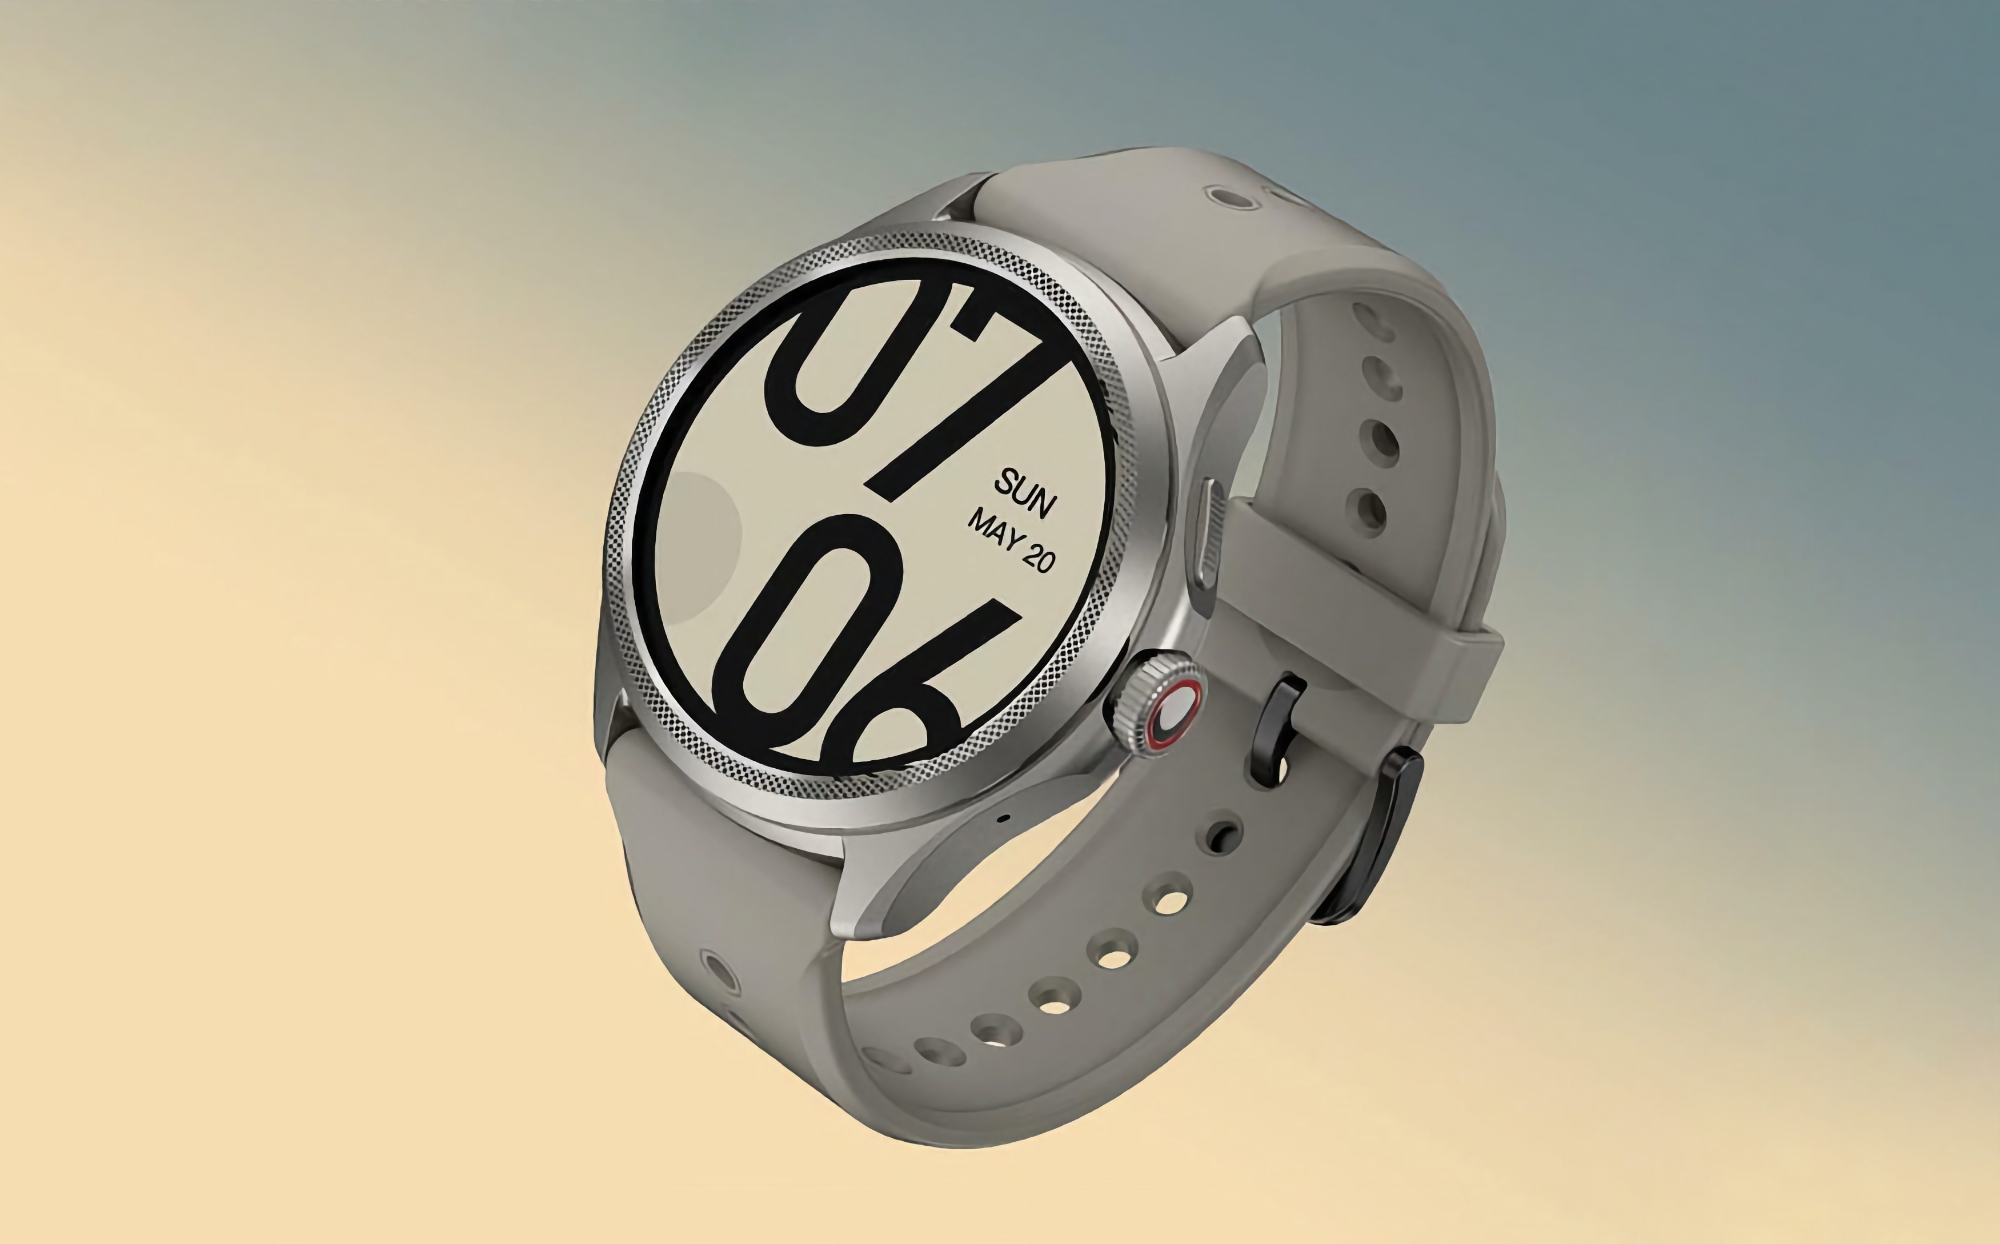 Offer of the day: TicWatch Pro 5 with Snapdragon W5+ Gen 1 chip and up to 45 days of battery life at $105 off